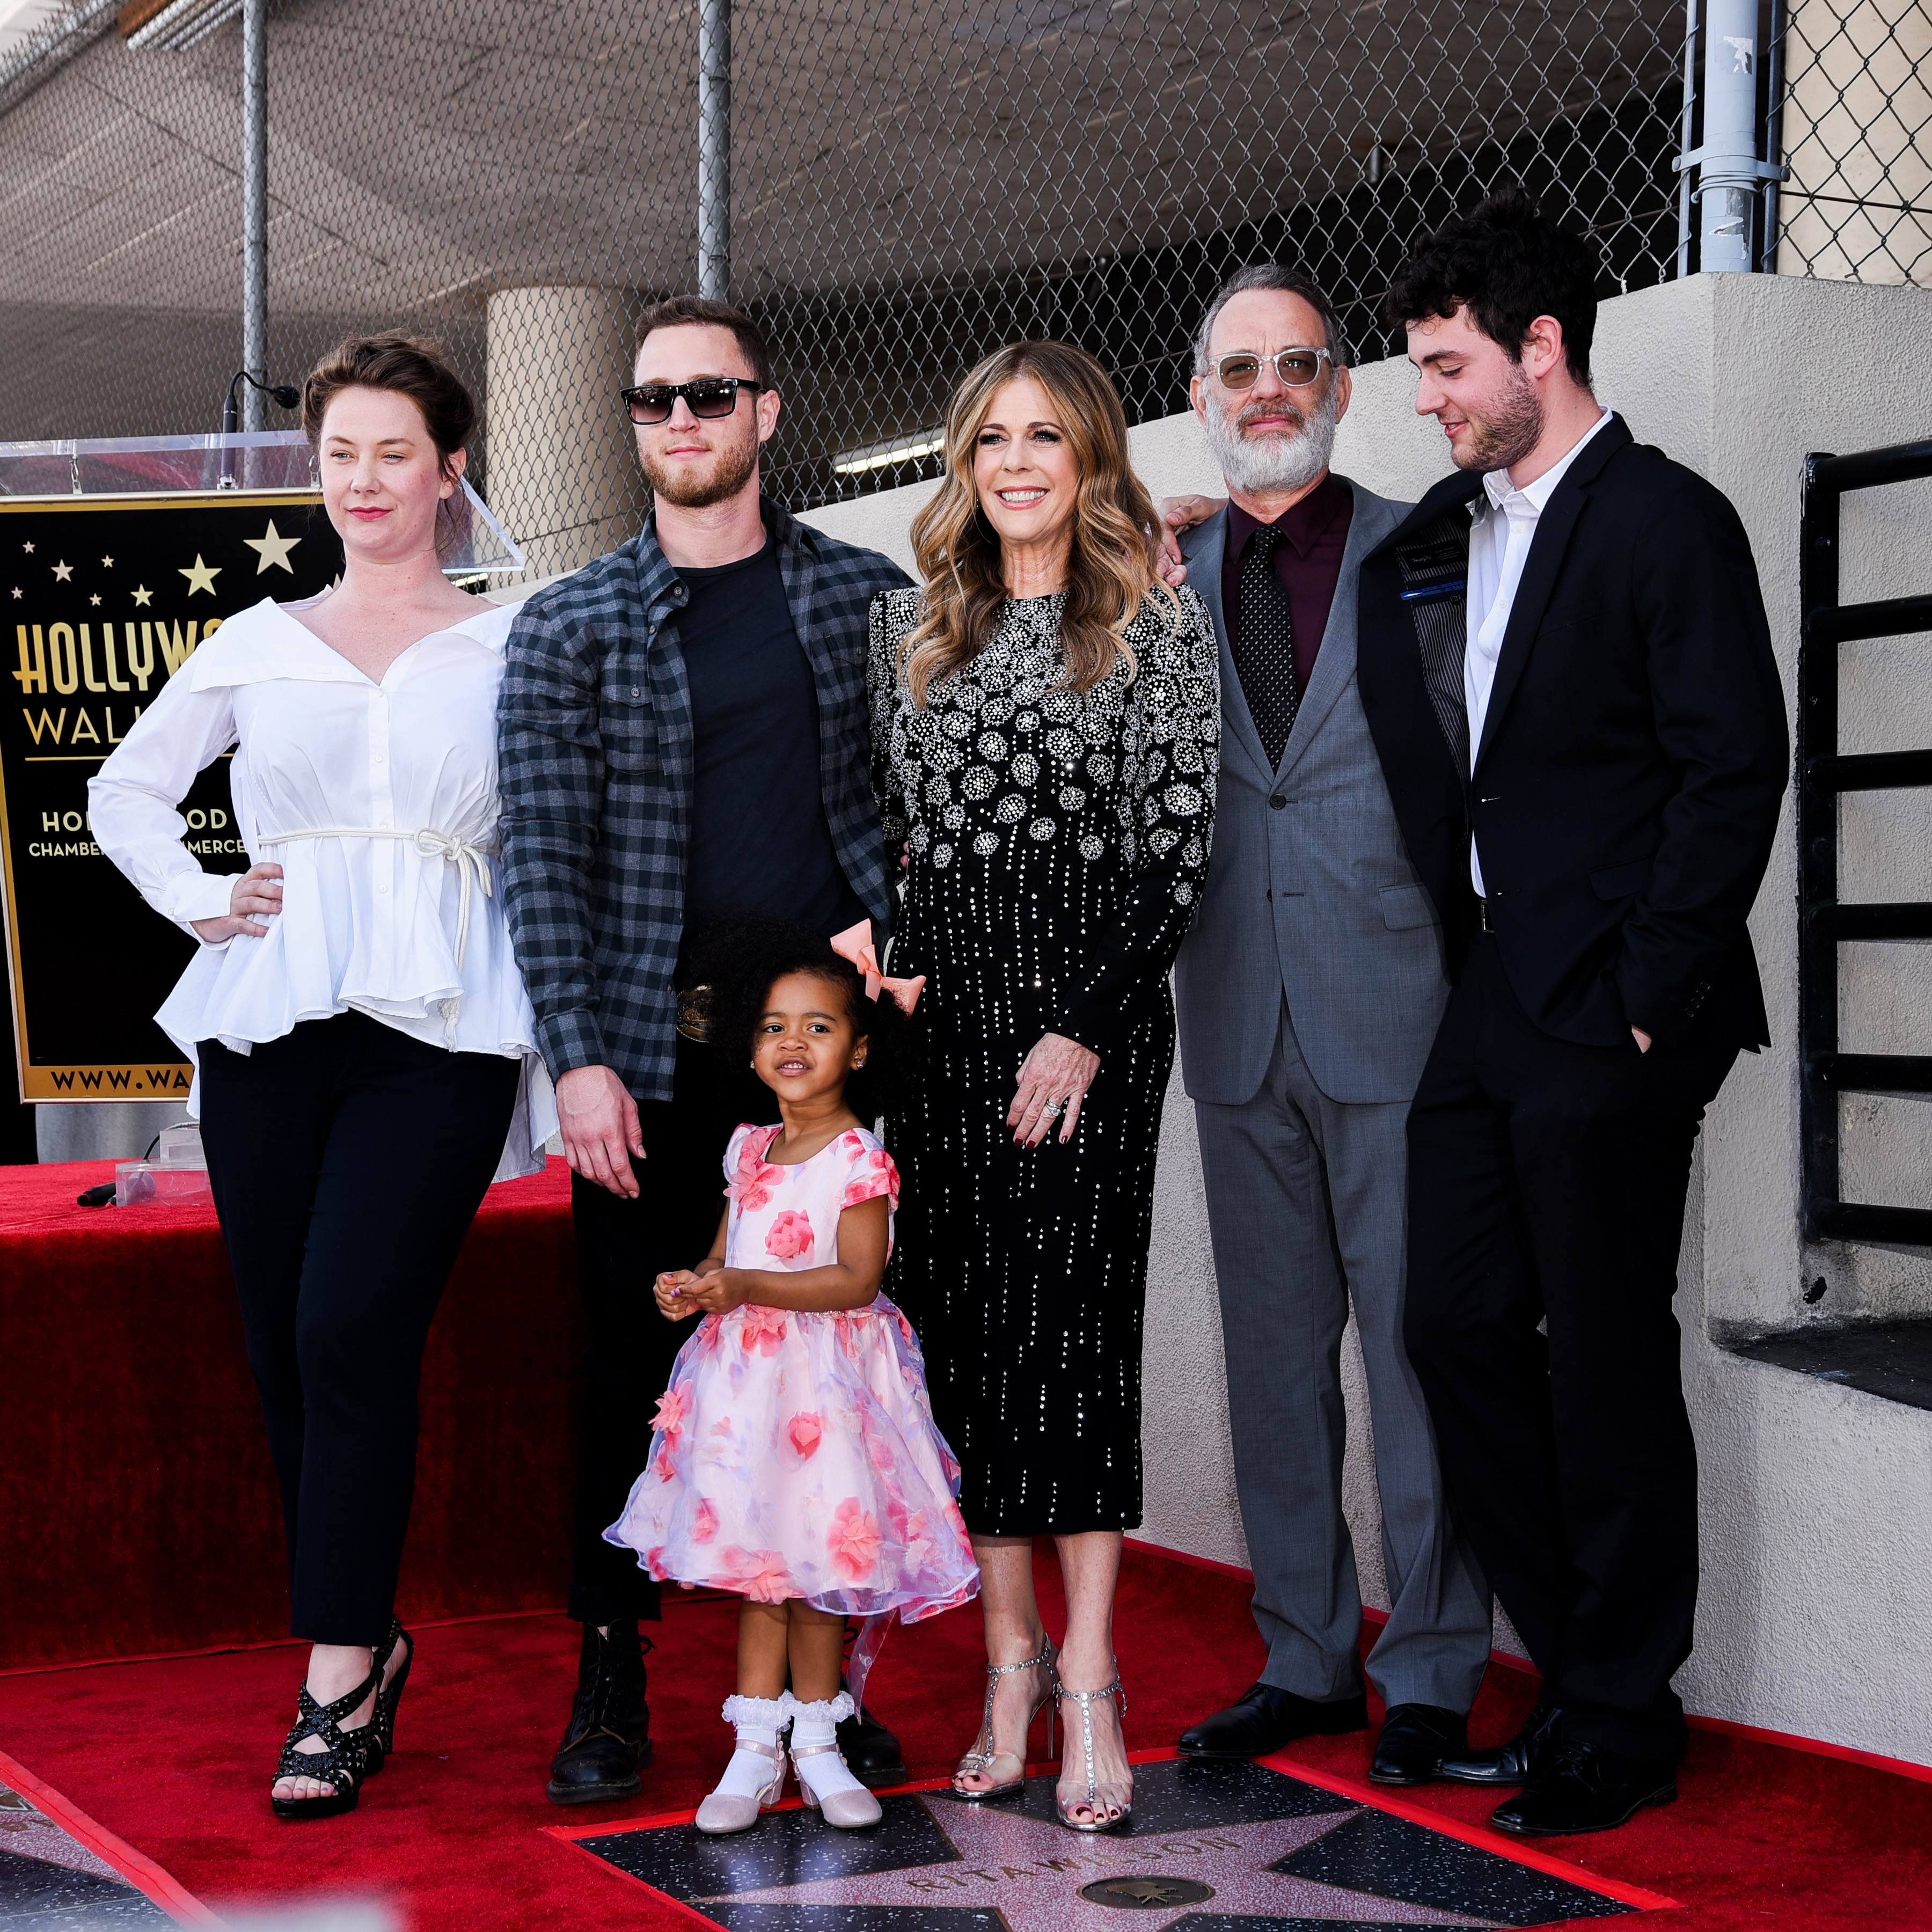 Rita Wilson, Tom Hanks, and their family members on March 29, 2019 in Hollywood, California | Source: Getty Images